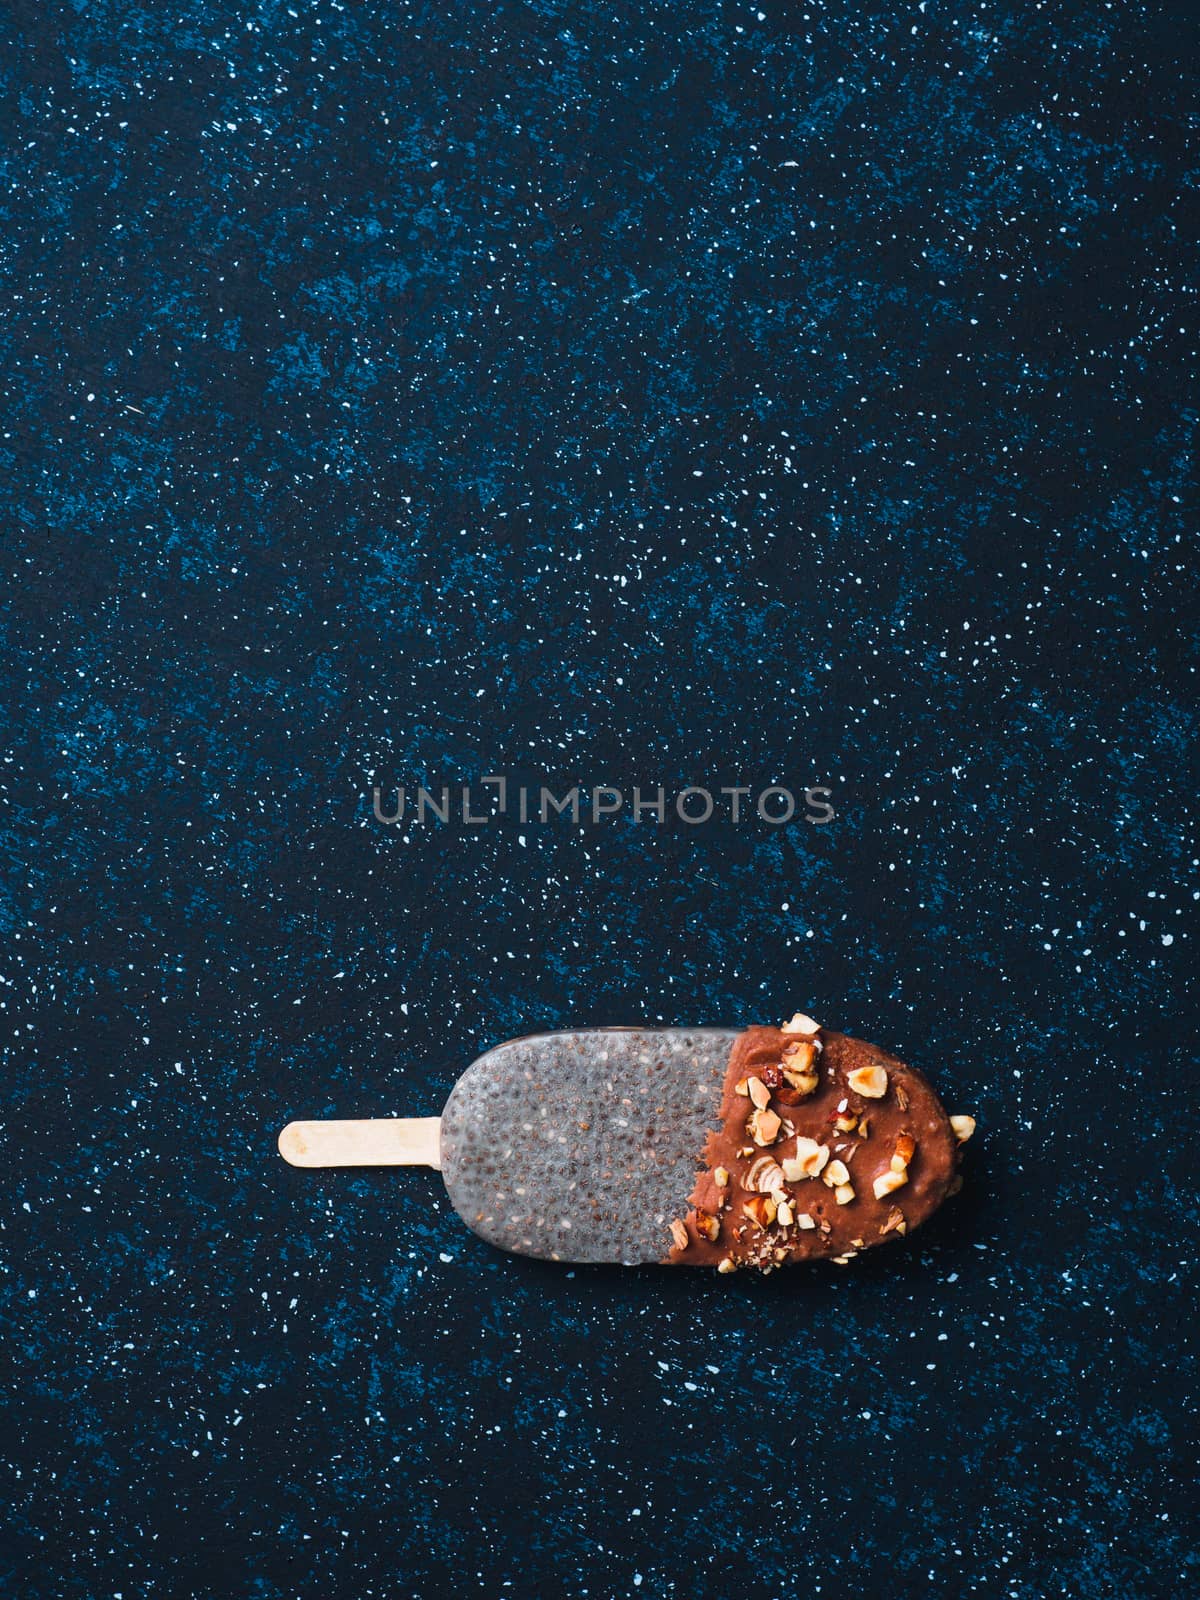 Chia popsicle with chocolate and nuts by fascinadora